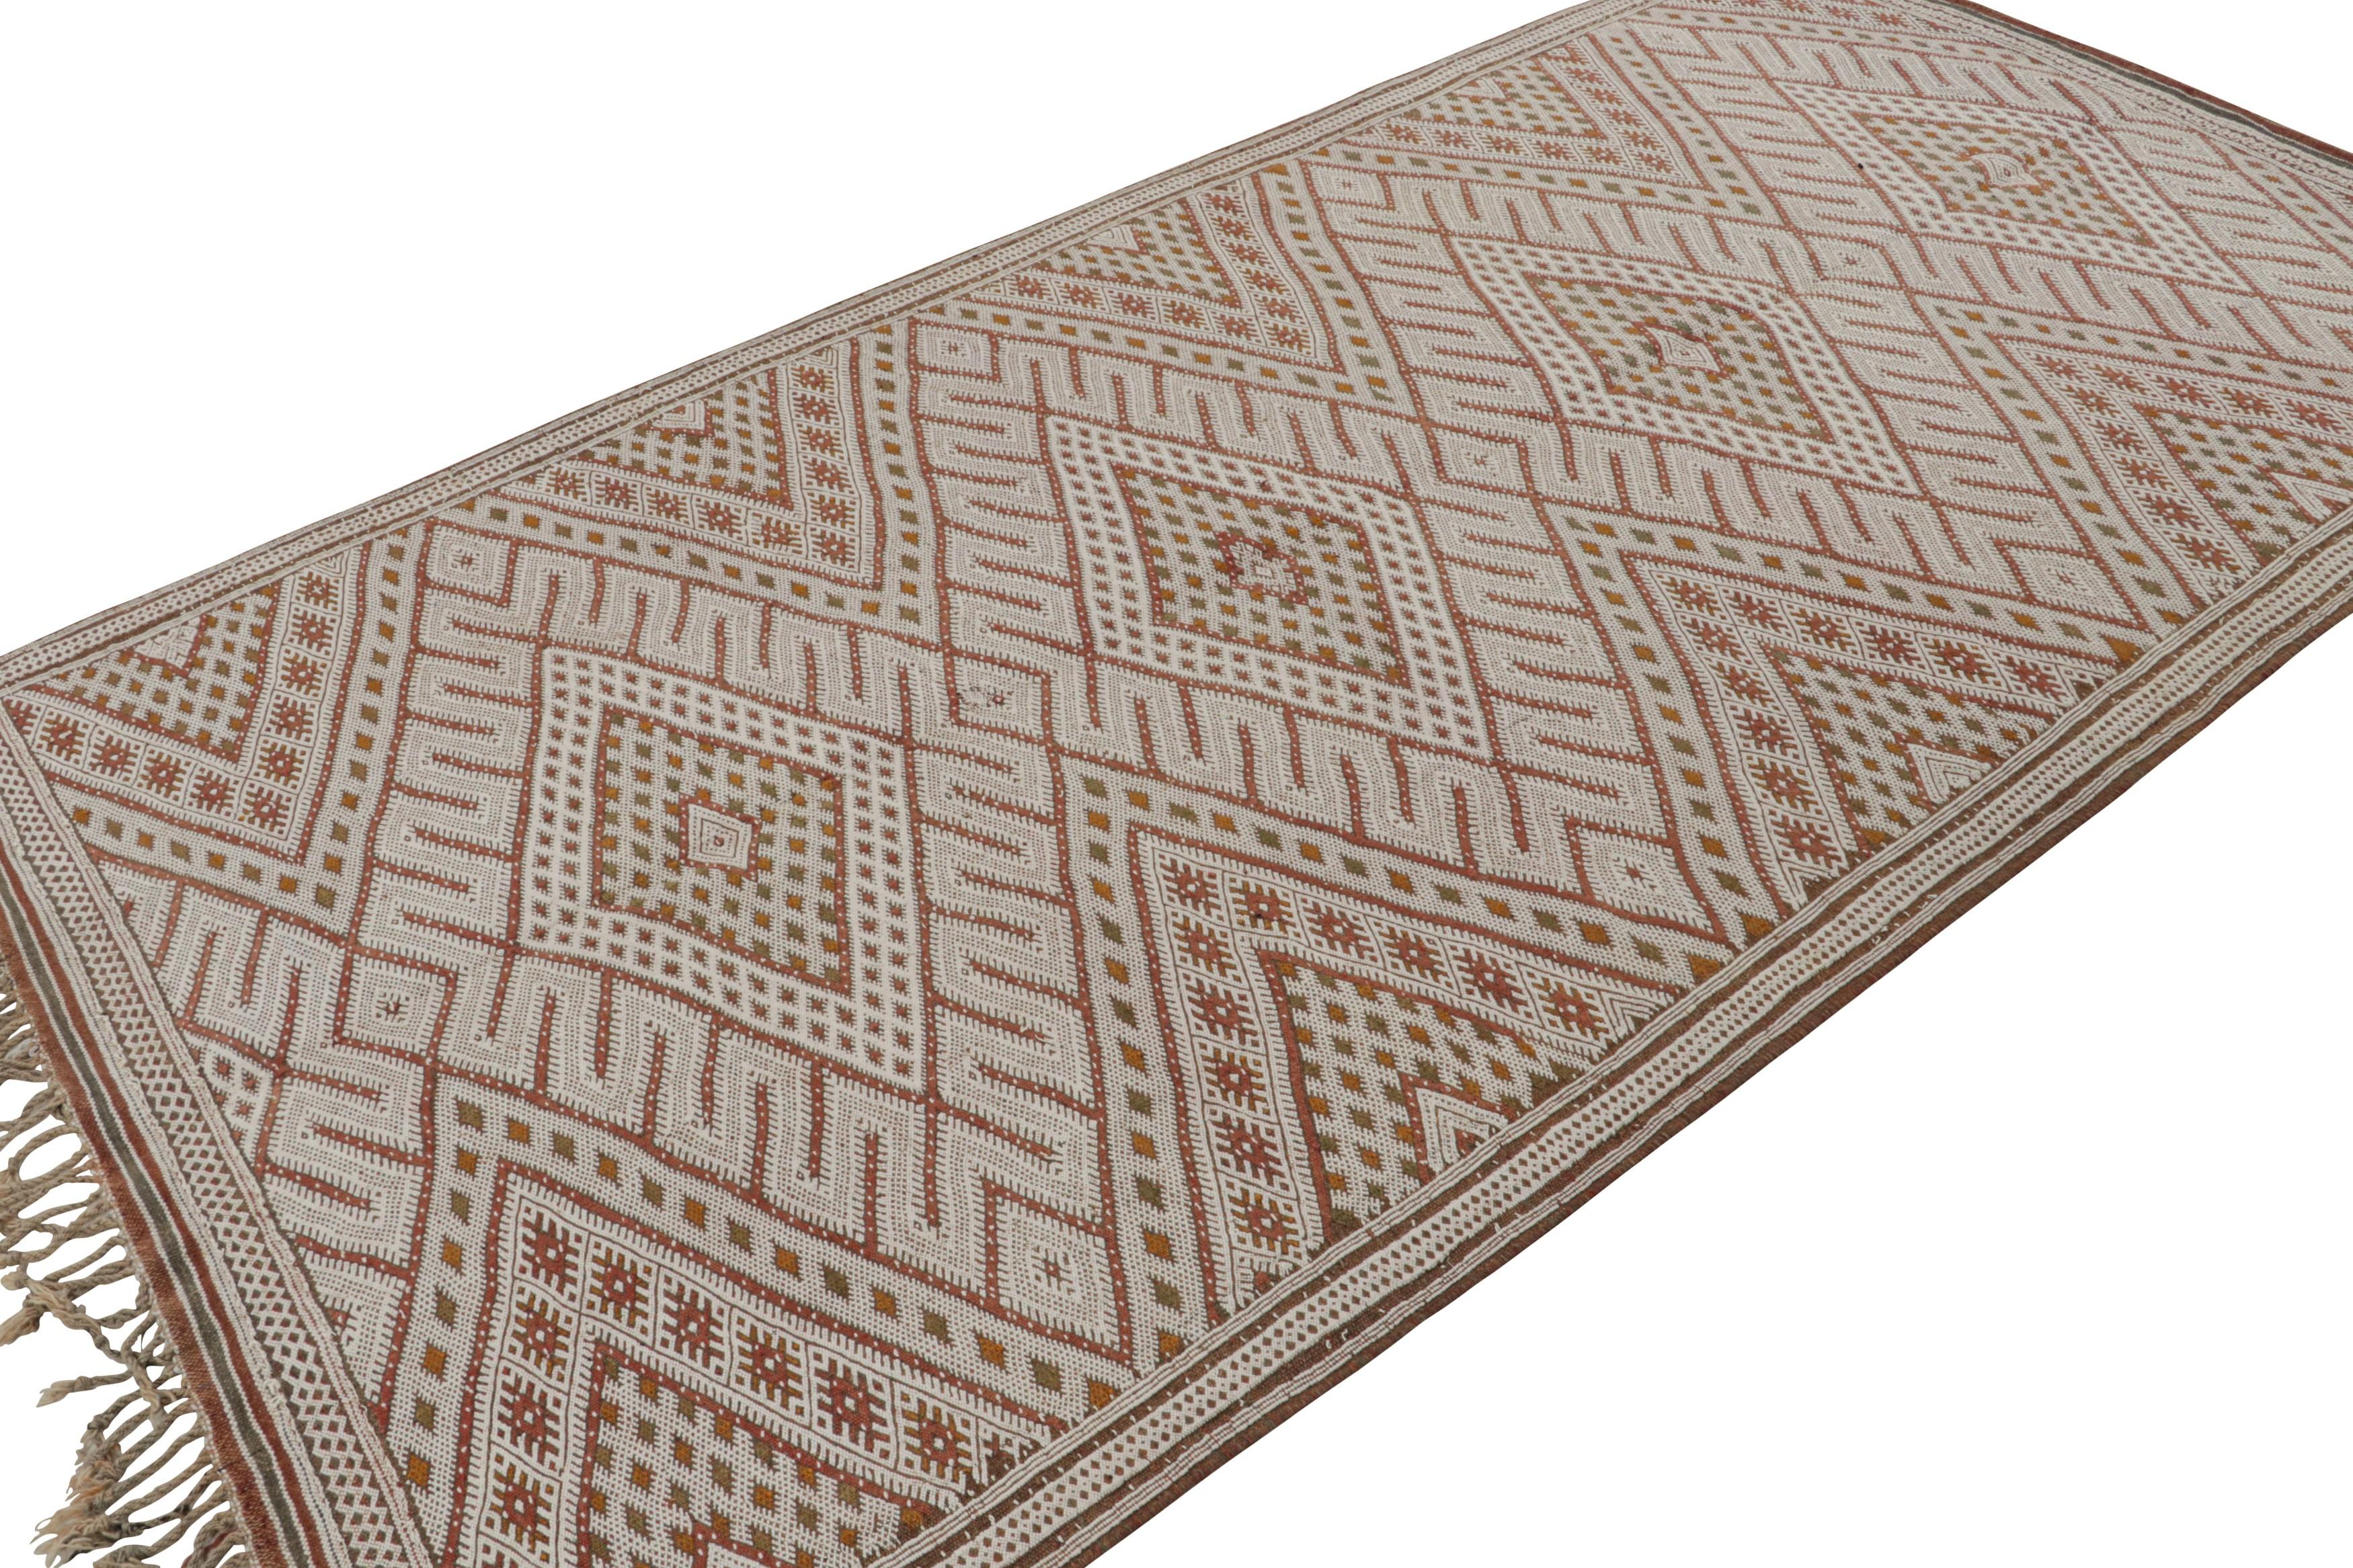 Handwoven in wool, a vintage 5x10 Zayane Moroccan Kilim - believed to originate from the Middle Atlas mountain range in Morocco.

On the Design:

Named for the same tribe, the piece reflects its deep attachment to the tribal weaving tradition. This